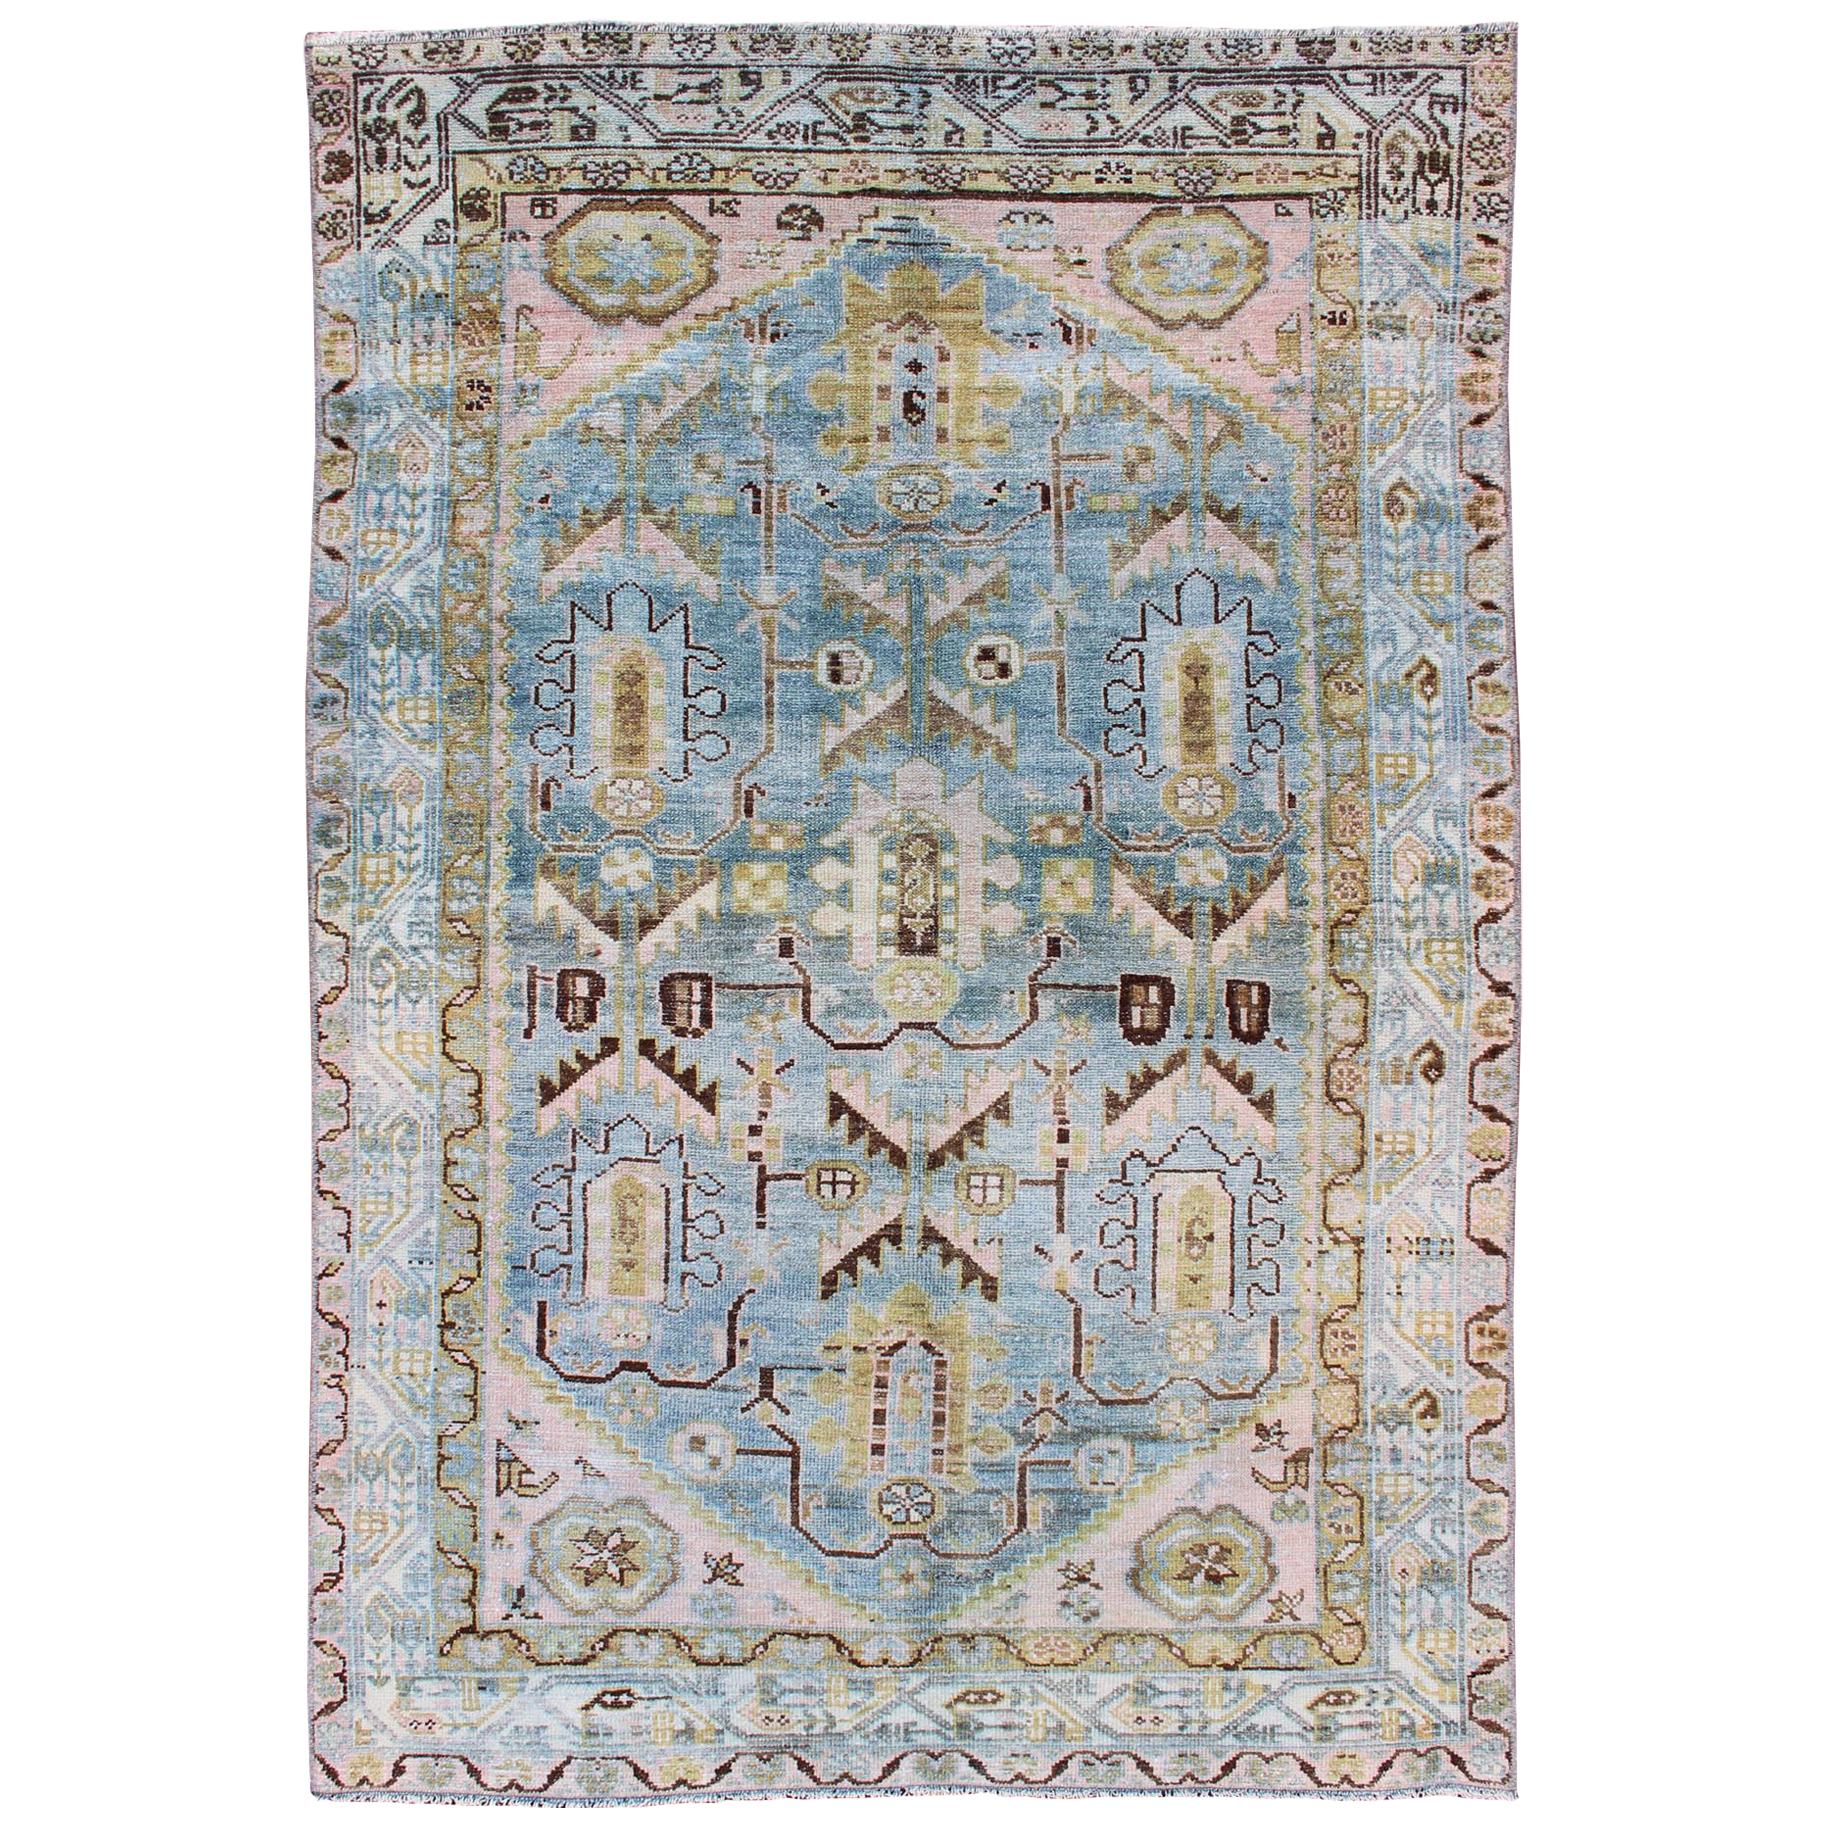 Antique Geometric Design Persian Malayer Rug in Light Blue, Pink, and Green